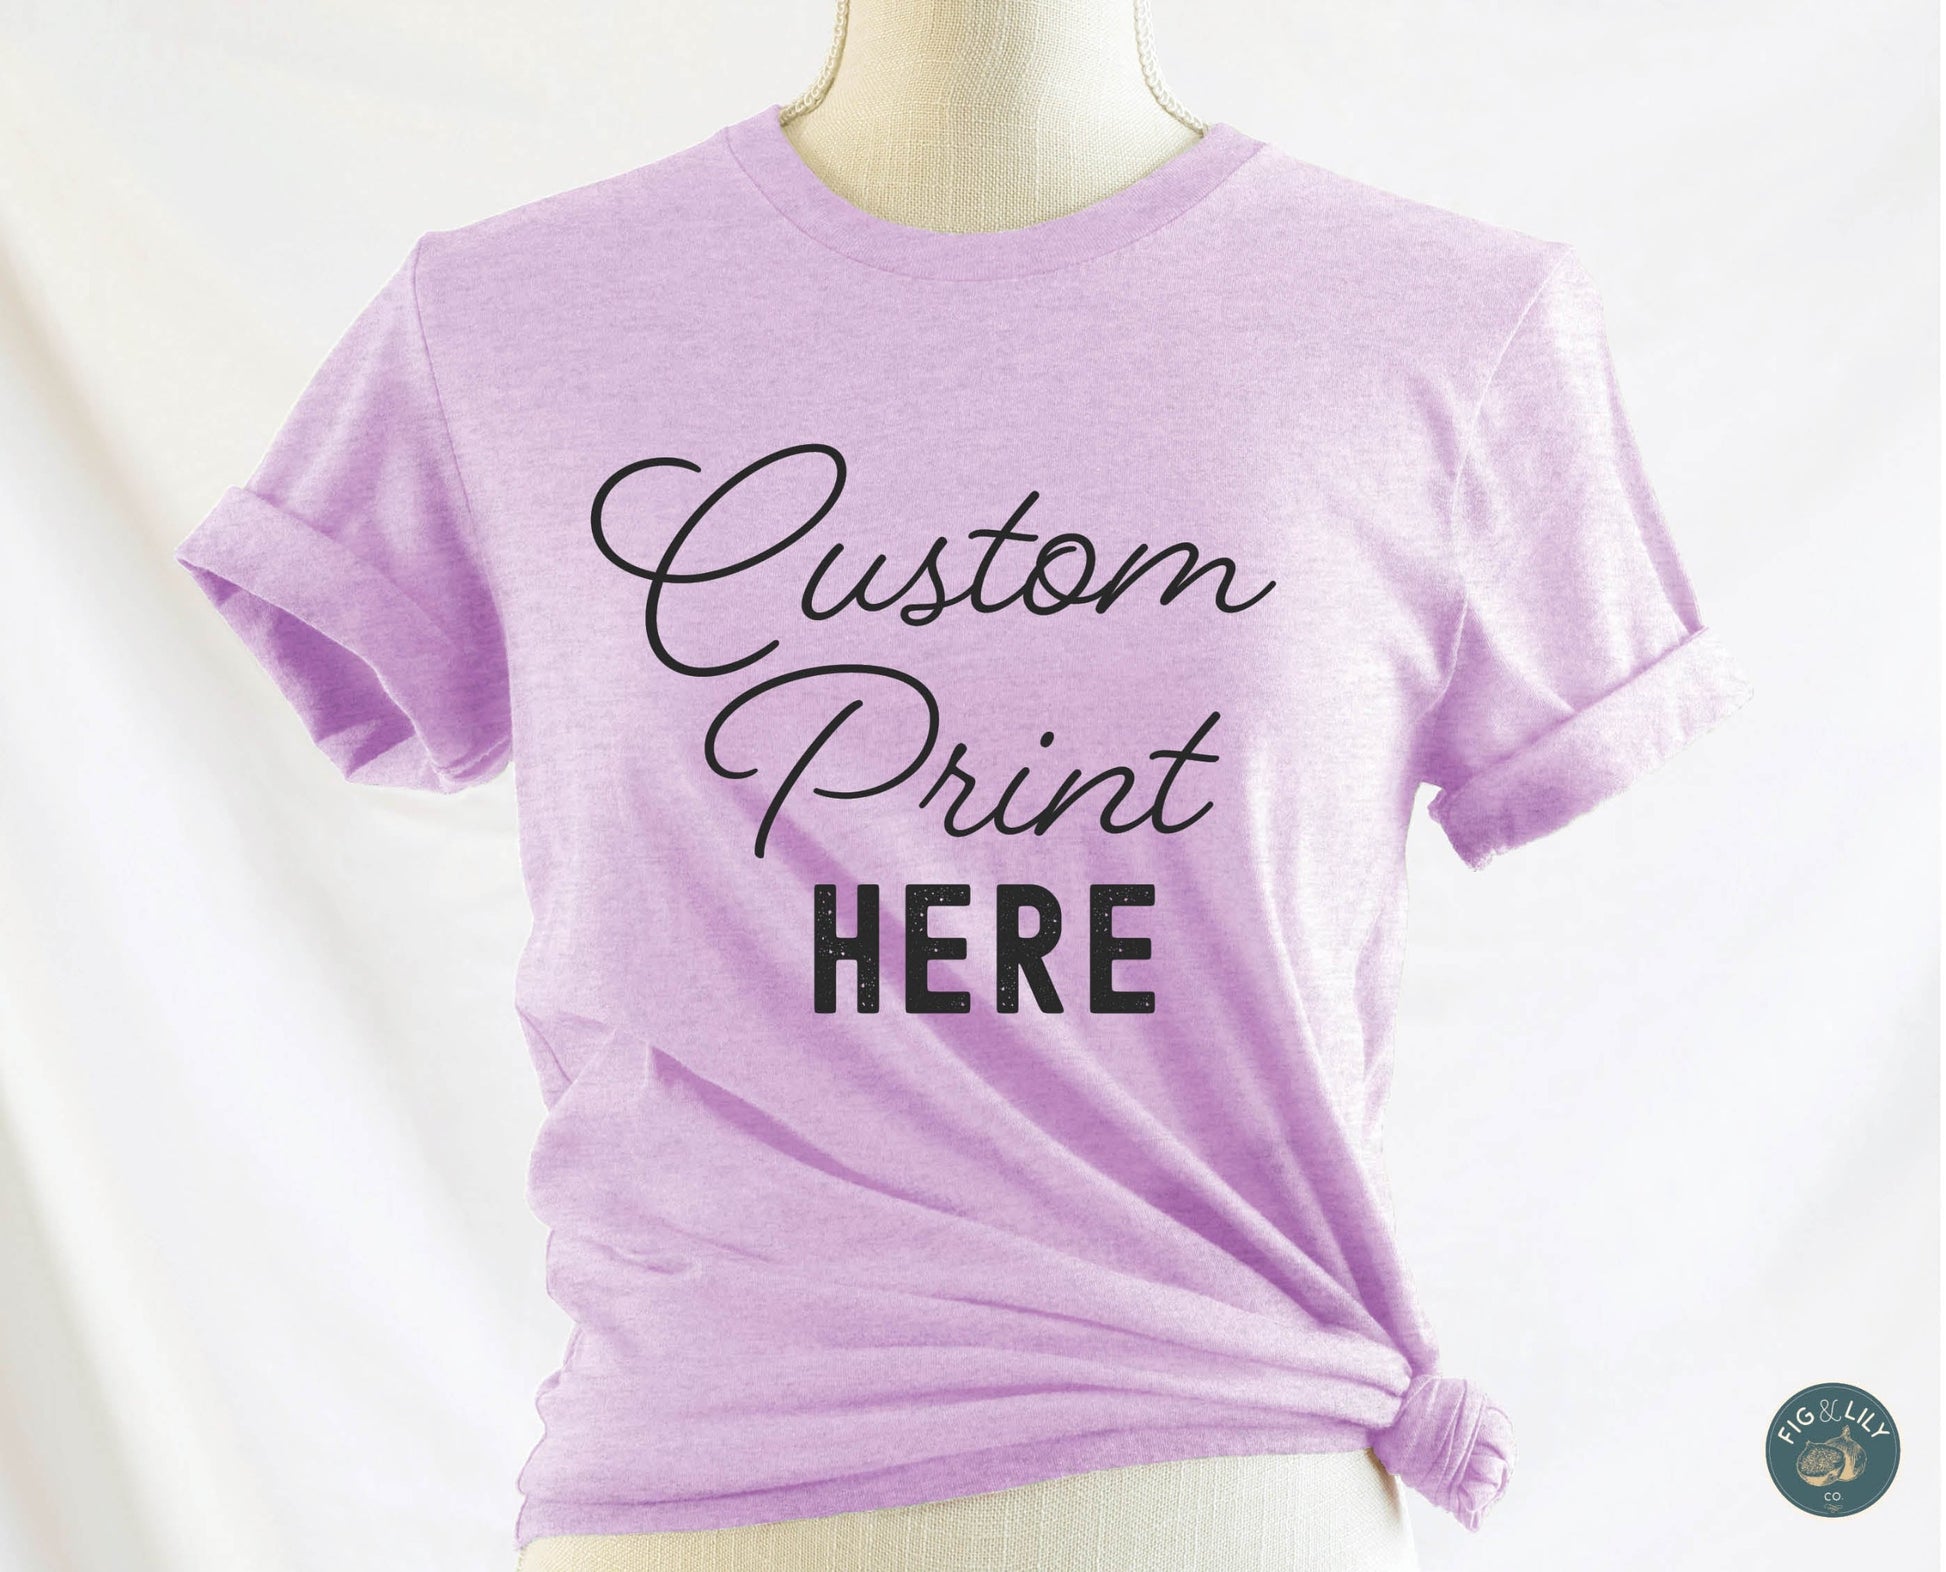 Fig & Lily Co. custom soft heather prism lilac purple unisex t-shirt with your personalized design printed, custom graphic design tees for men and women